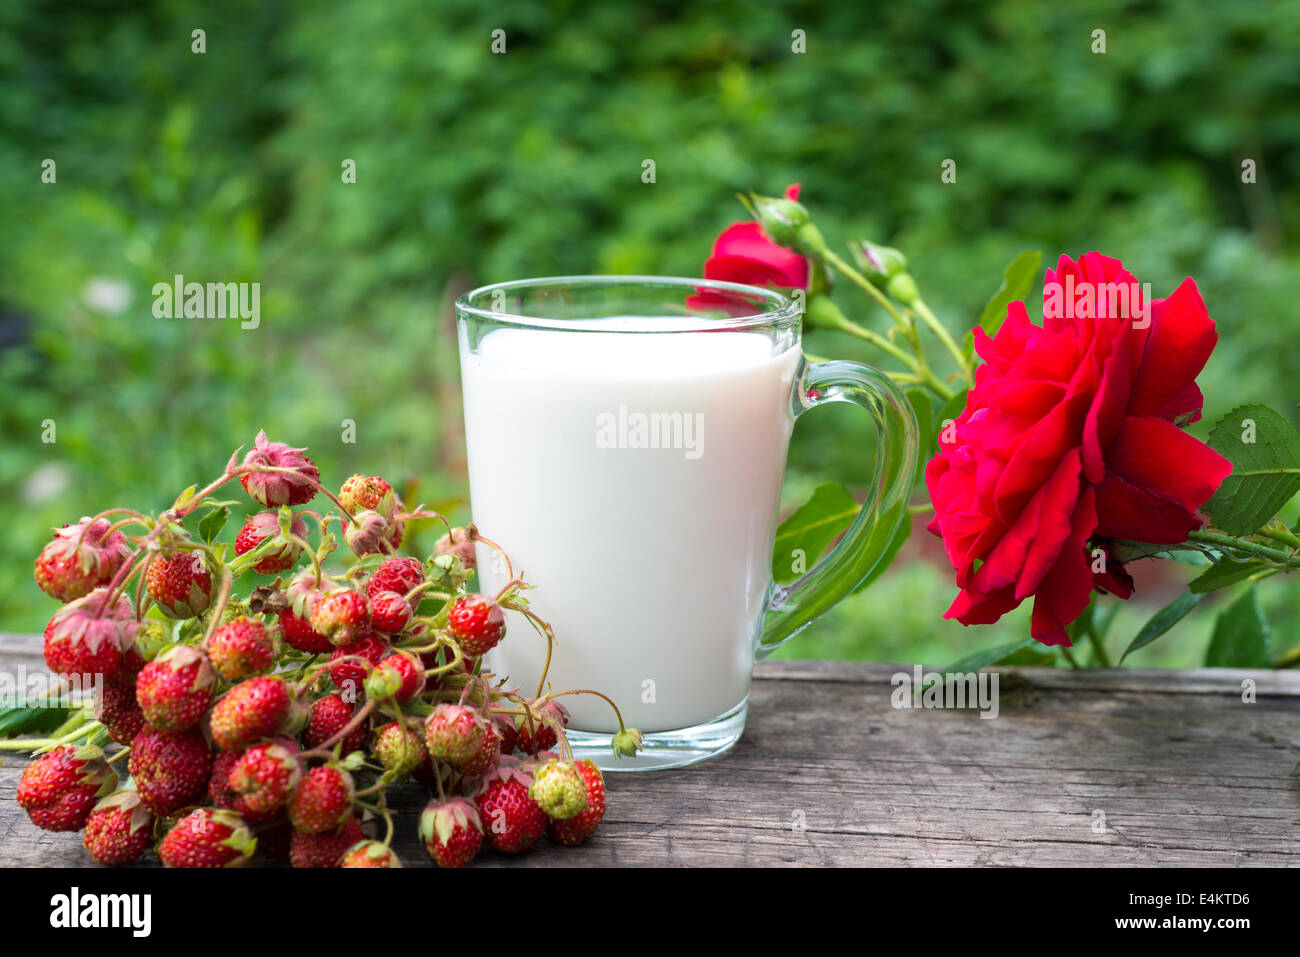 Cup of milk and fresh strawberries Stock Photo